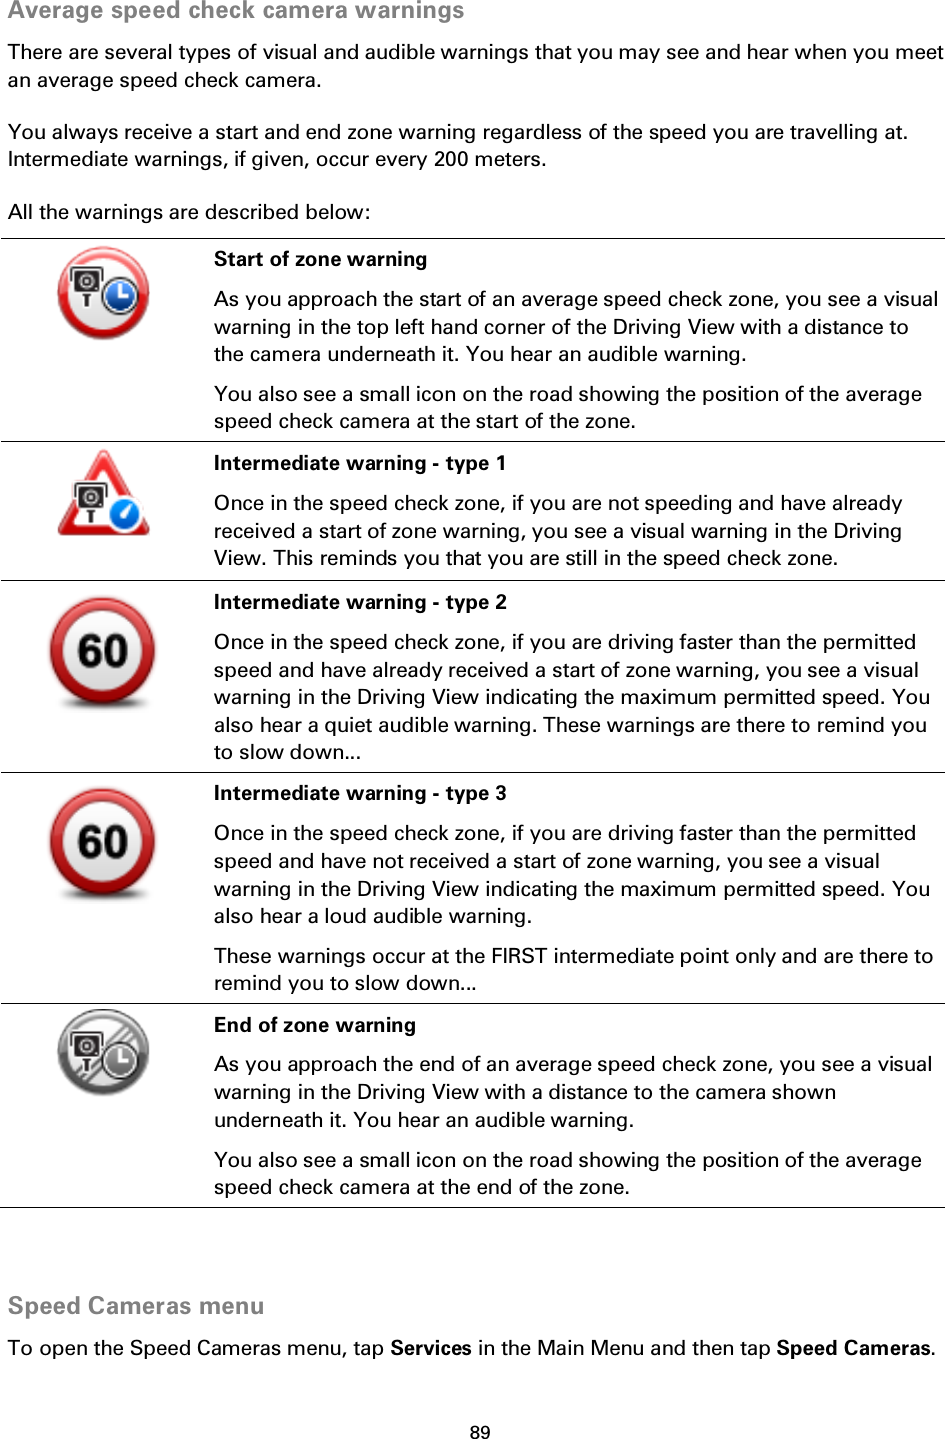 89    Average speed check camera warnings There are several types of visual and audible warnings that you may see and hear when you meet an average speed check camera. You always receive a start and end zone warning regardless of the speed you are travelling at. Intermediate warnings, if given, occur every 200 meters. All the warnings are described below:  Start of zone warning As you approach the start of an average speed check zone, you see a visual warning in the top left hand corner of the Driving View with a distance to the camera underneath it. You hear an audible warning. You also see a small icon on the road showing the position of the average speed check camera at the start of the zone.  Intermediate warning - type 1 Once in the speed check zone, if you are not speeding and have already received a start of zone warning, you see a visual warning in the Driving View. This reminds you that you are still in the speed check zone.  Intermediate warning - type 2 Once in the speed check zone, if you are driving faster than the permitted speed and have already received a start of zone warning, you see a visual warning in the Driving View indicating the maximum permitted speed. You also hear a quiet audible warning. These warnings are there to remind you to slow down...  Intermediate warning - type 3 Once in the speed check zone, if you are driving faster than the permitted speed and have not received a start of zone warning, you see a visual warning in the Driving View indicating the maximum permitted speed. You also hear a loud audible warning. These warnings occur at the FIRST intermediate point only and are there to remind you to slow down...  End of zone warning As you approach the end of an average speed check zone, you see a visual warning in the Driving View with a distance to the camera shown underneath it. You hear an audible warning. You also see a small icon on the road showing the position of the average speed check camera at the end of the zone.   Speed Cameras menu To open the Speed Cameras menu, tap Services in the Main Menu and then tap Speed Cameras. 